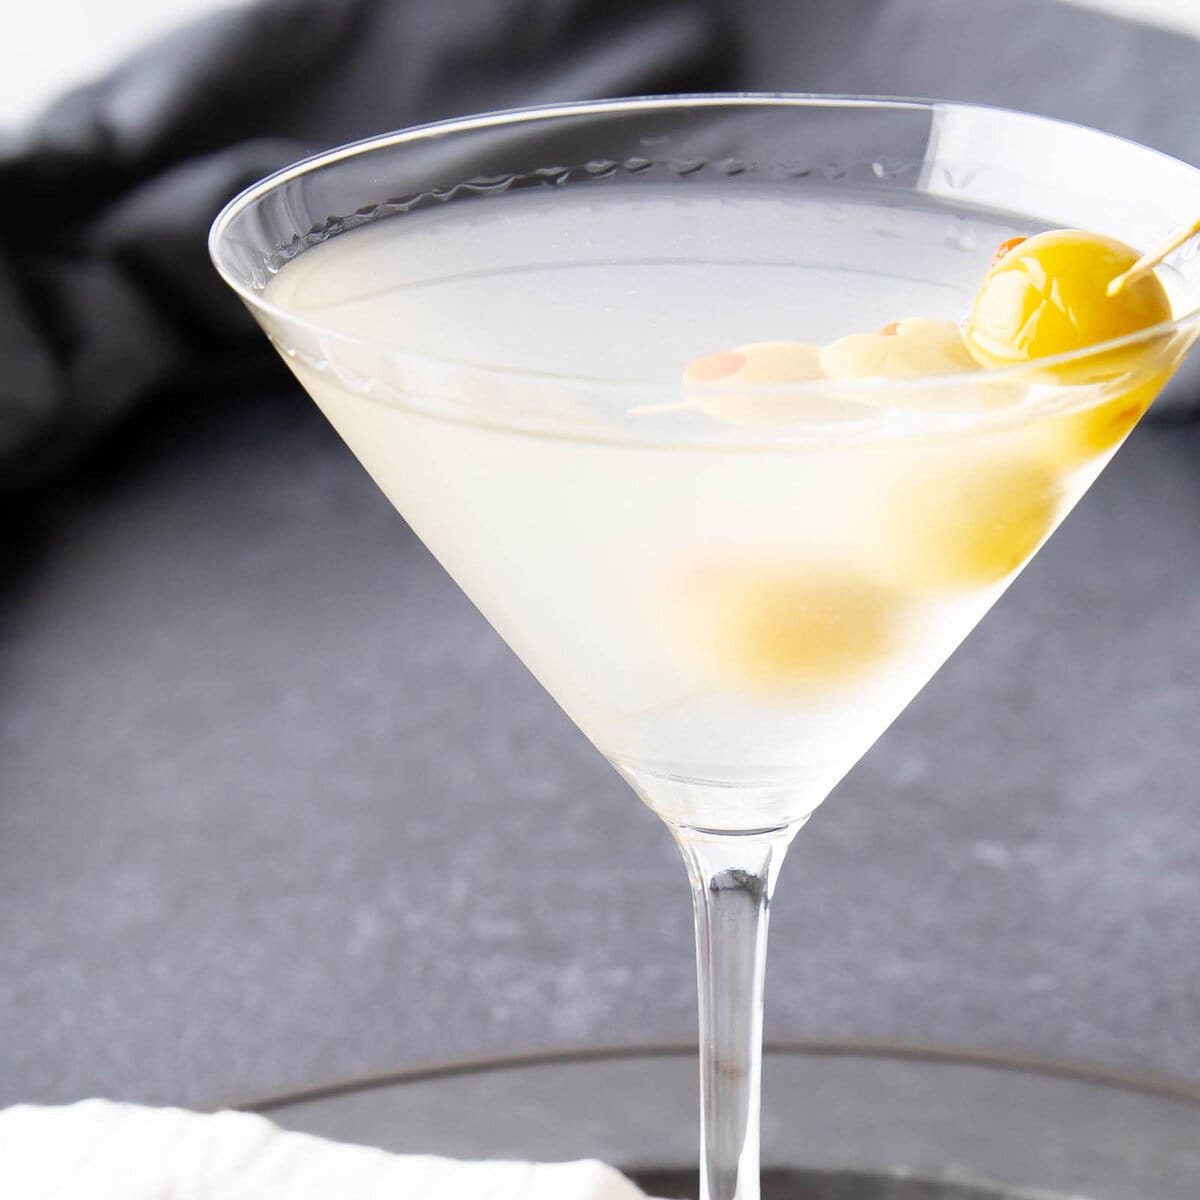 Dirty Martini served in a chilled glass with an olive skewer against a gray backdrop